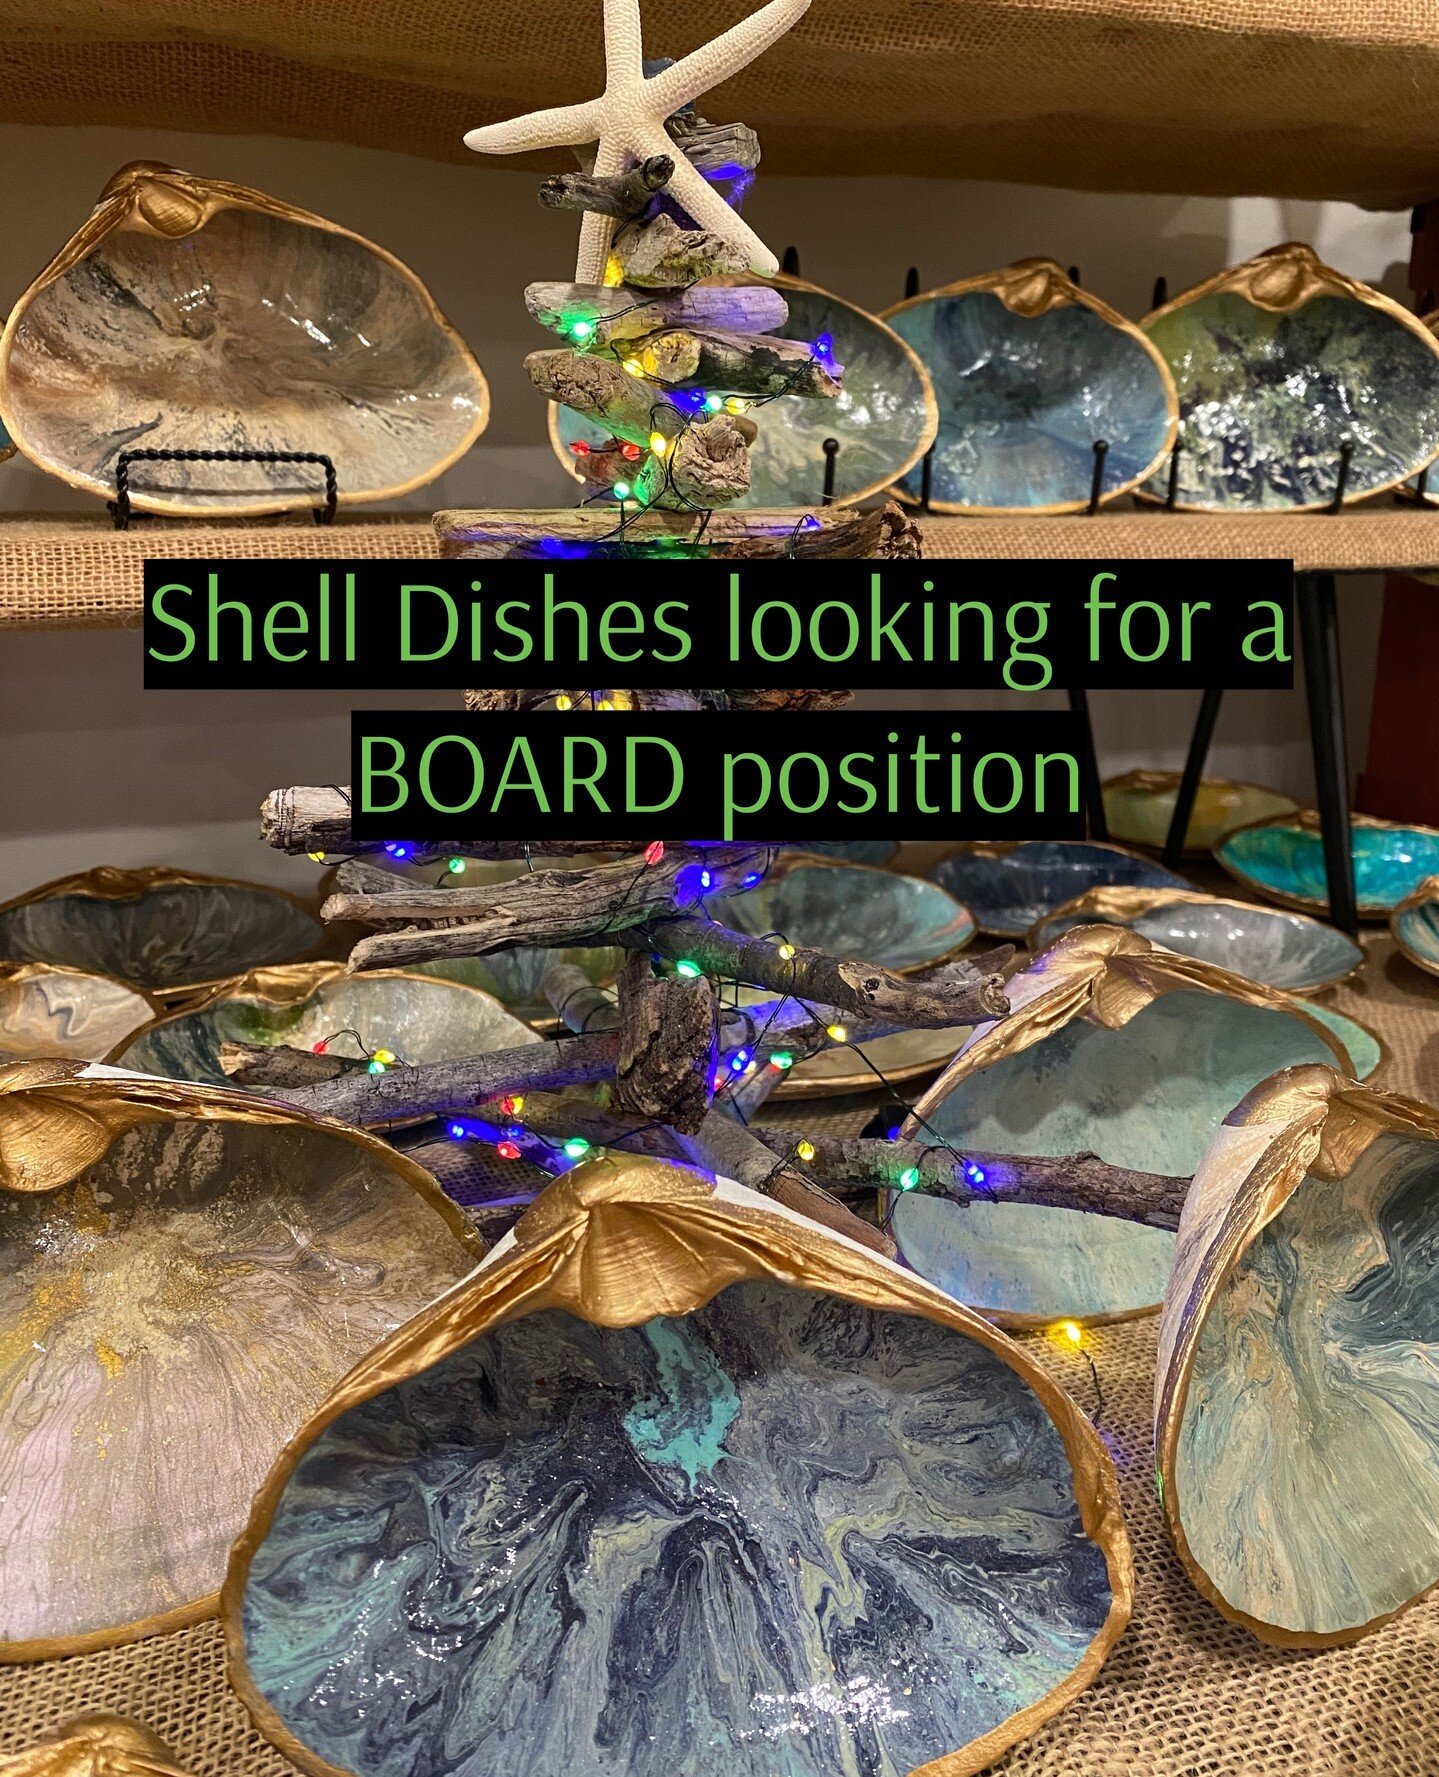 LJM Shell Dishes looking for a BOARD position!⁠
⁠
Upcycled and hand designed, these glorious South Shore quahog shells are unique dishes for your Holiday Charcuterie Board.  They are acrylic-poured, rimmed with gold leaf enamel, and shellacked for a 